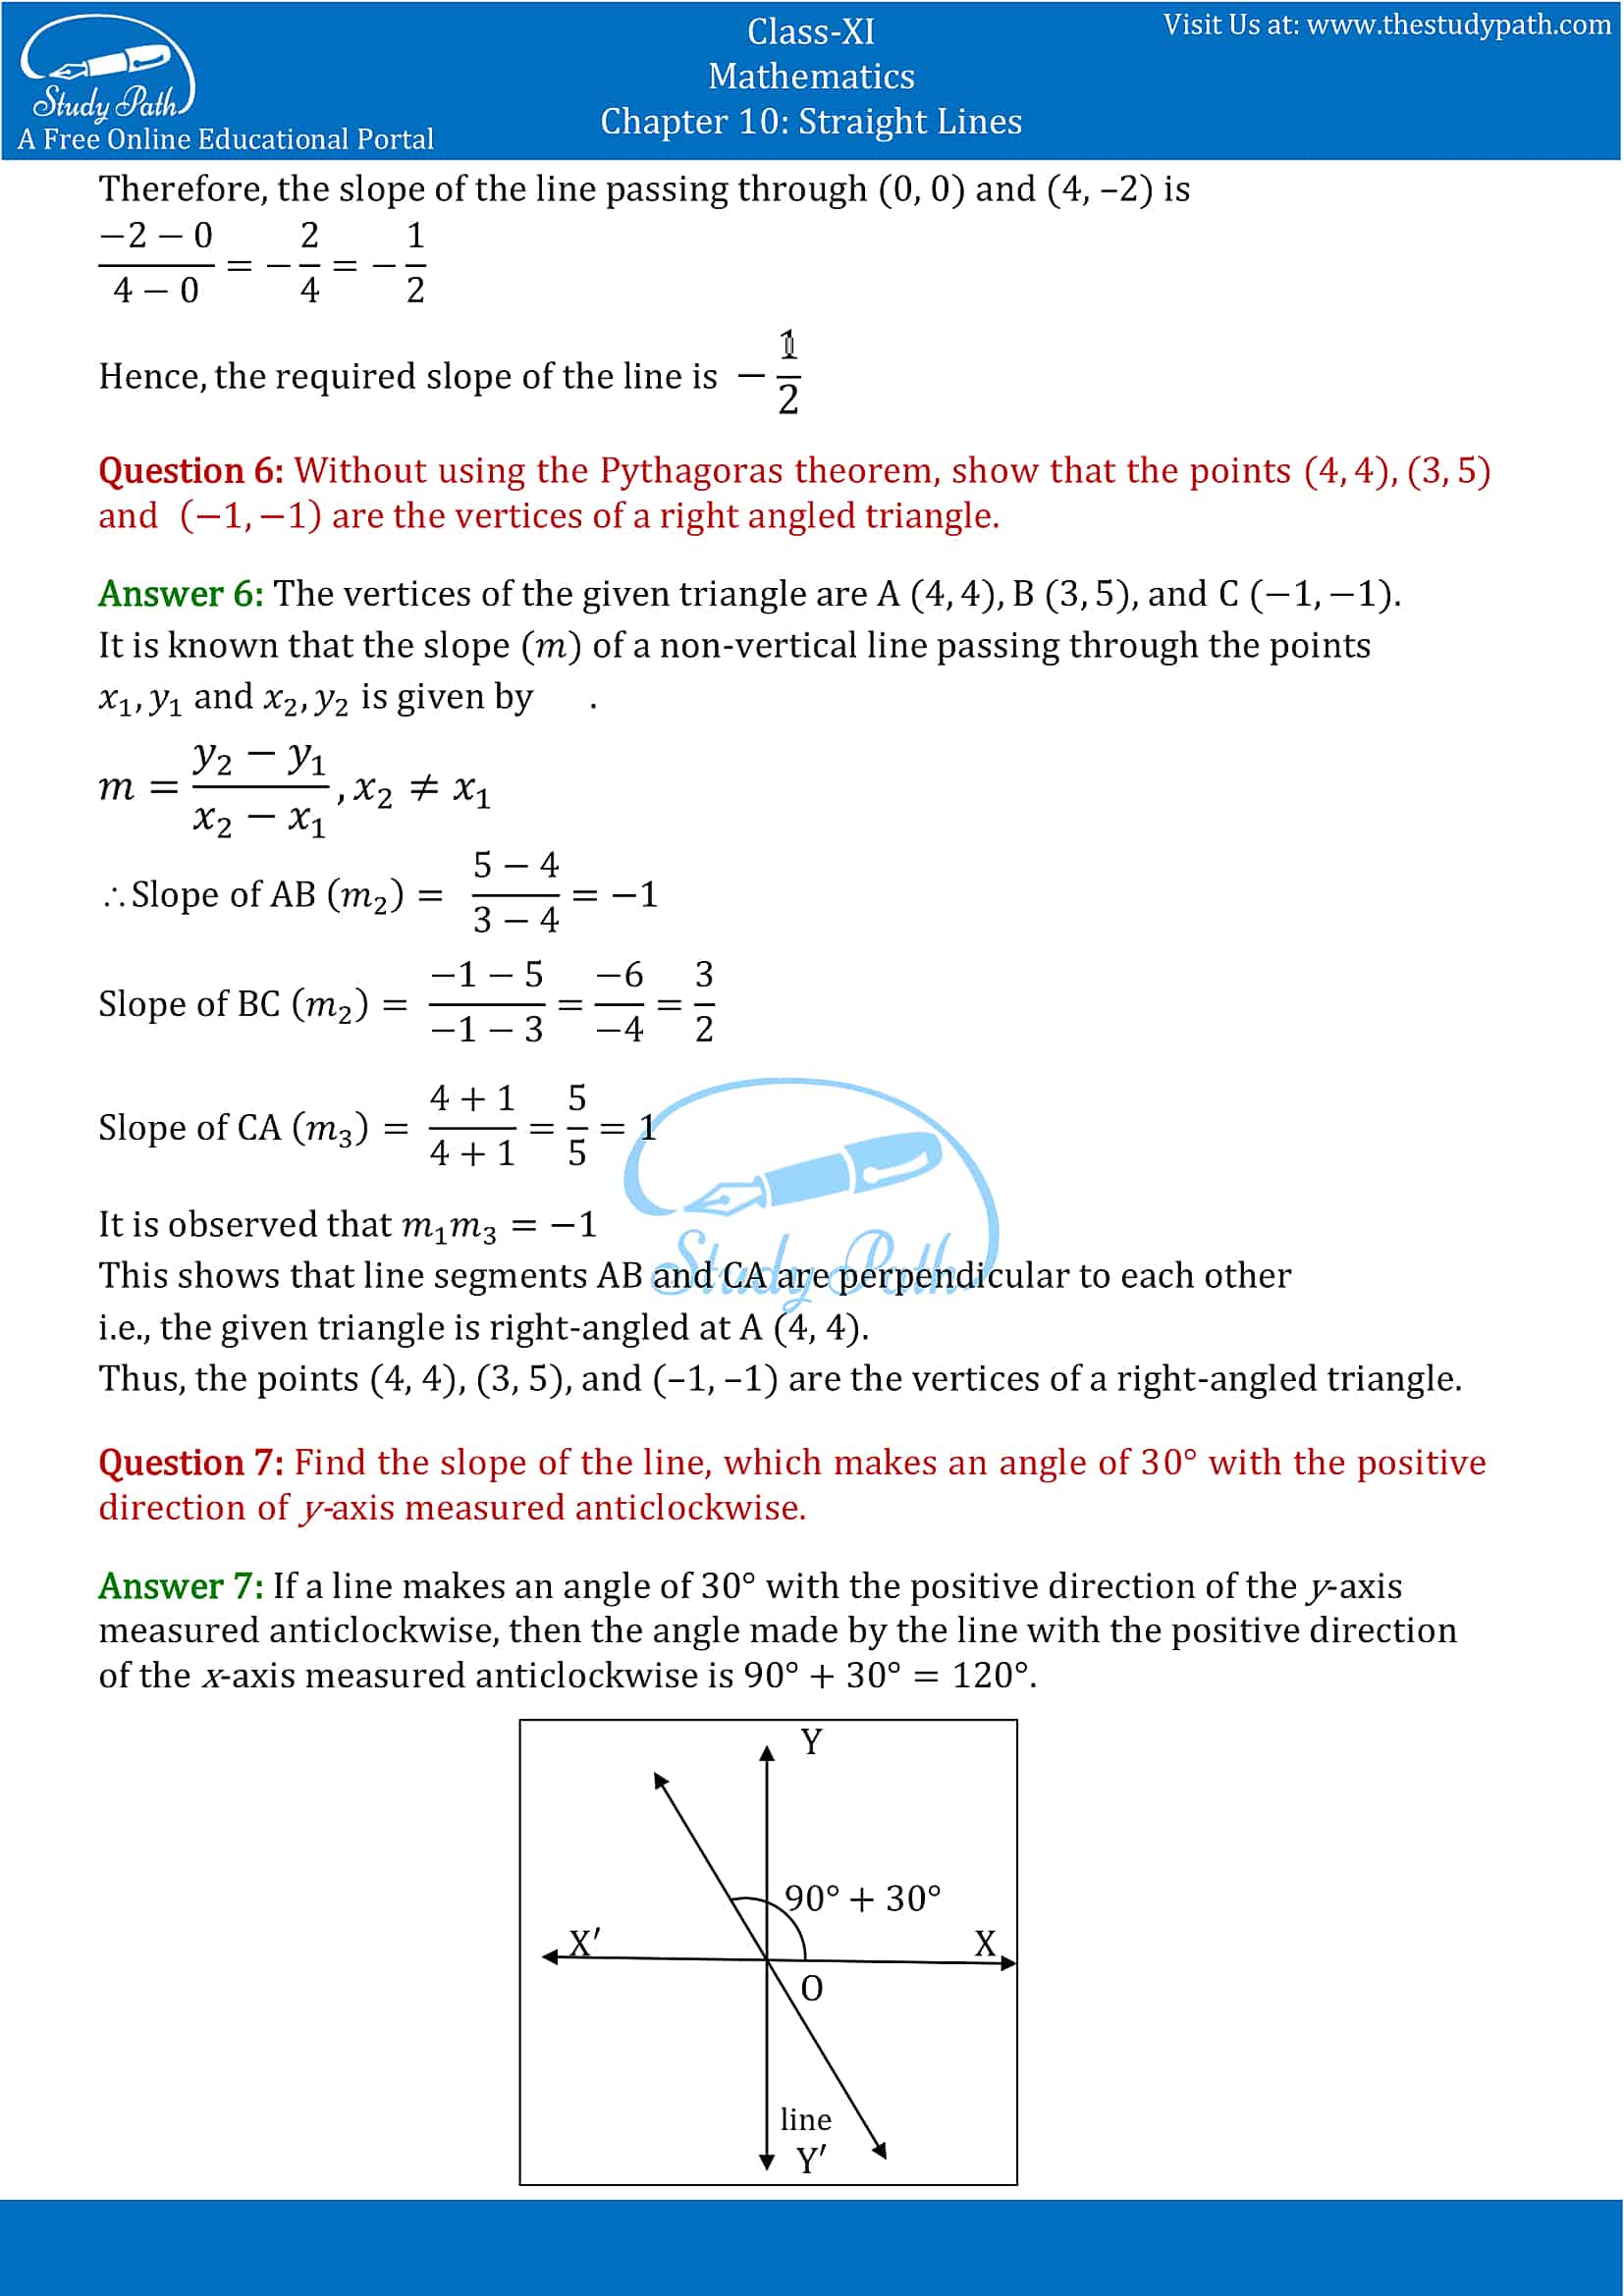 NCERT Solutions for Class 11 Maths chapter 10 Straight Lines Exercise 10.1 Part-4